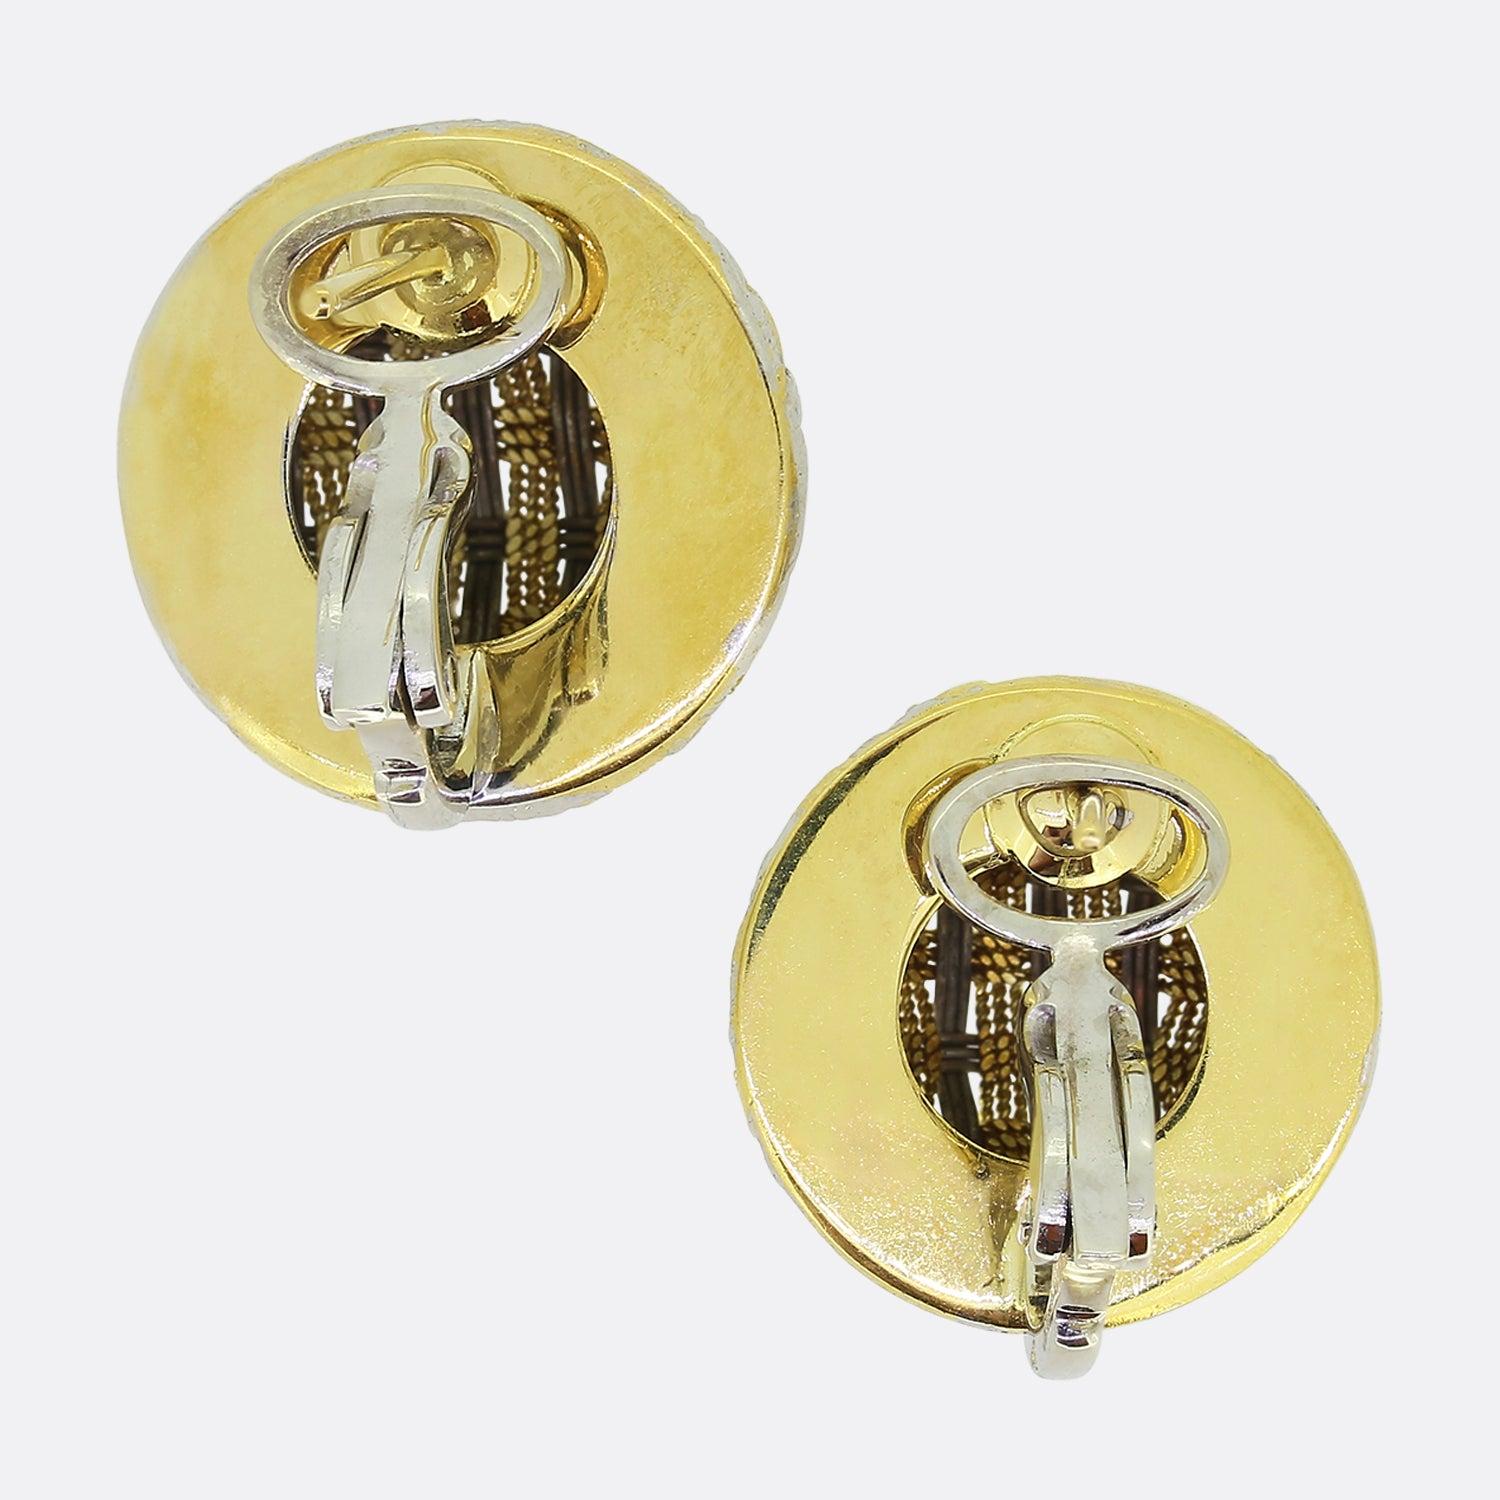 Here we have a lovely pair of vintage woven earrings. Each piece has been crafted from 18ct gold into a circular domed shaped with both identical earrings showcasing a yellow gold roped design entwined with a white gold interlace. 

Condition: Used